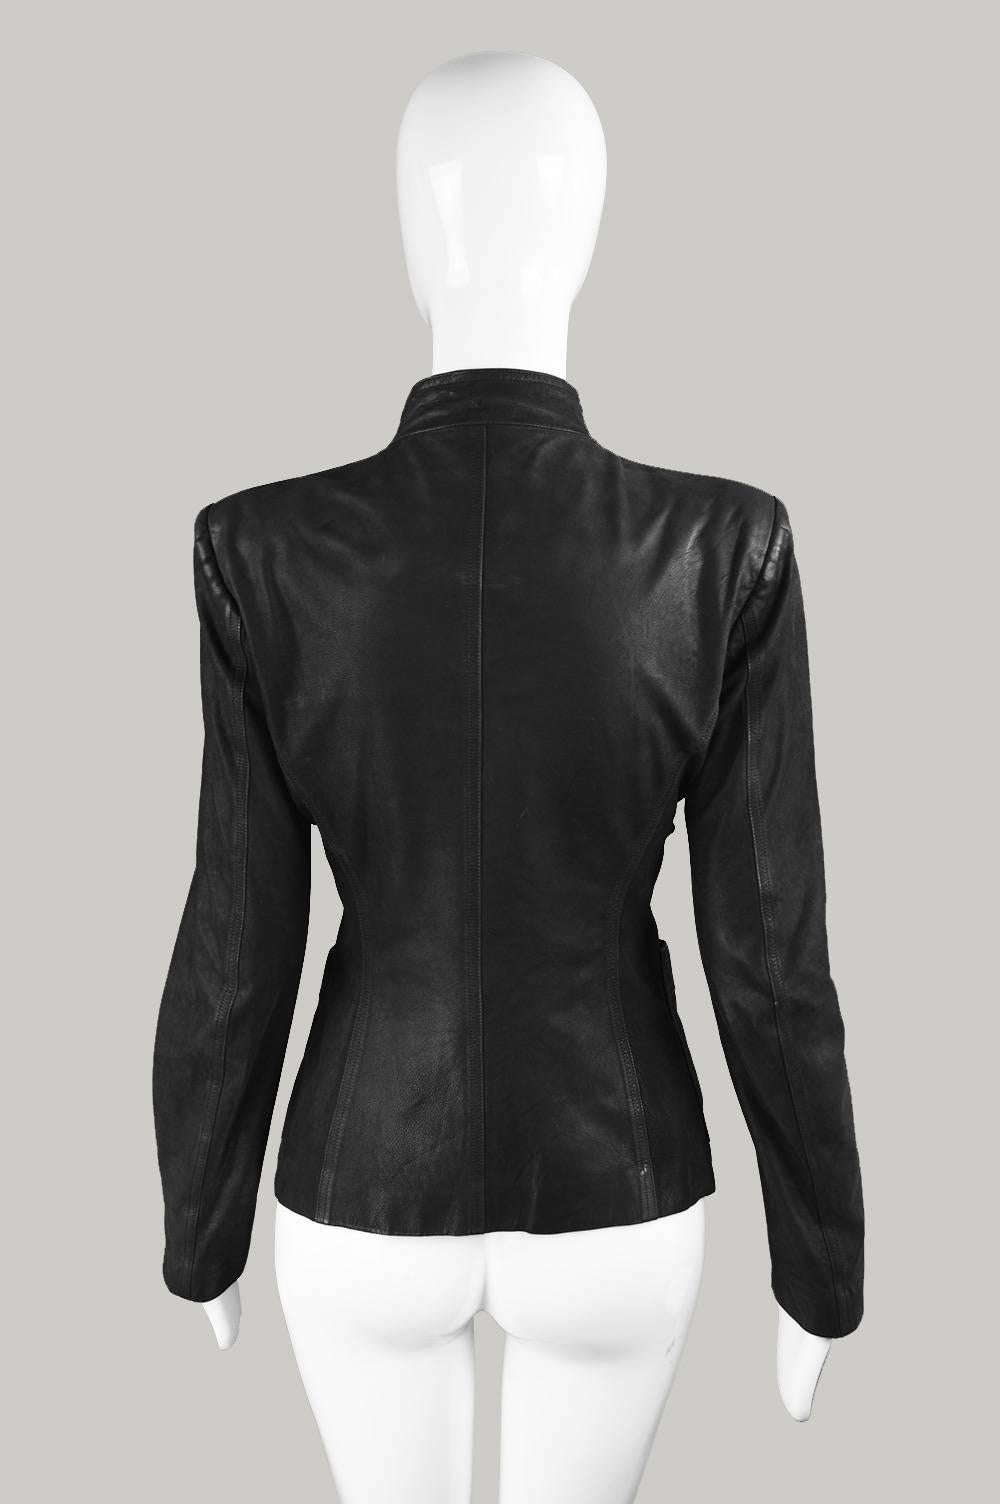 Tom Ford for Yves Saint Laurent Black Draped Ruffle Leather Jacket , Fall 2003 4